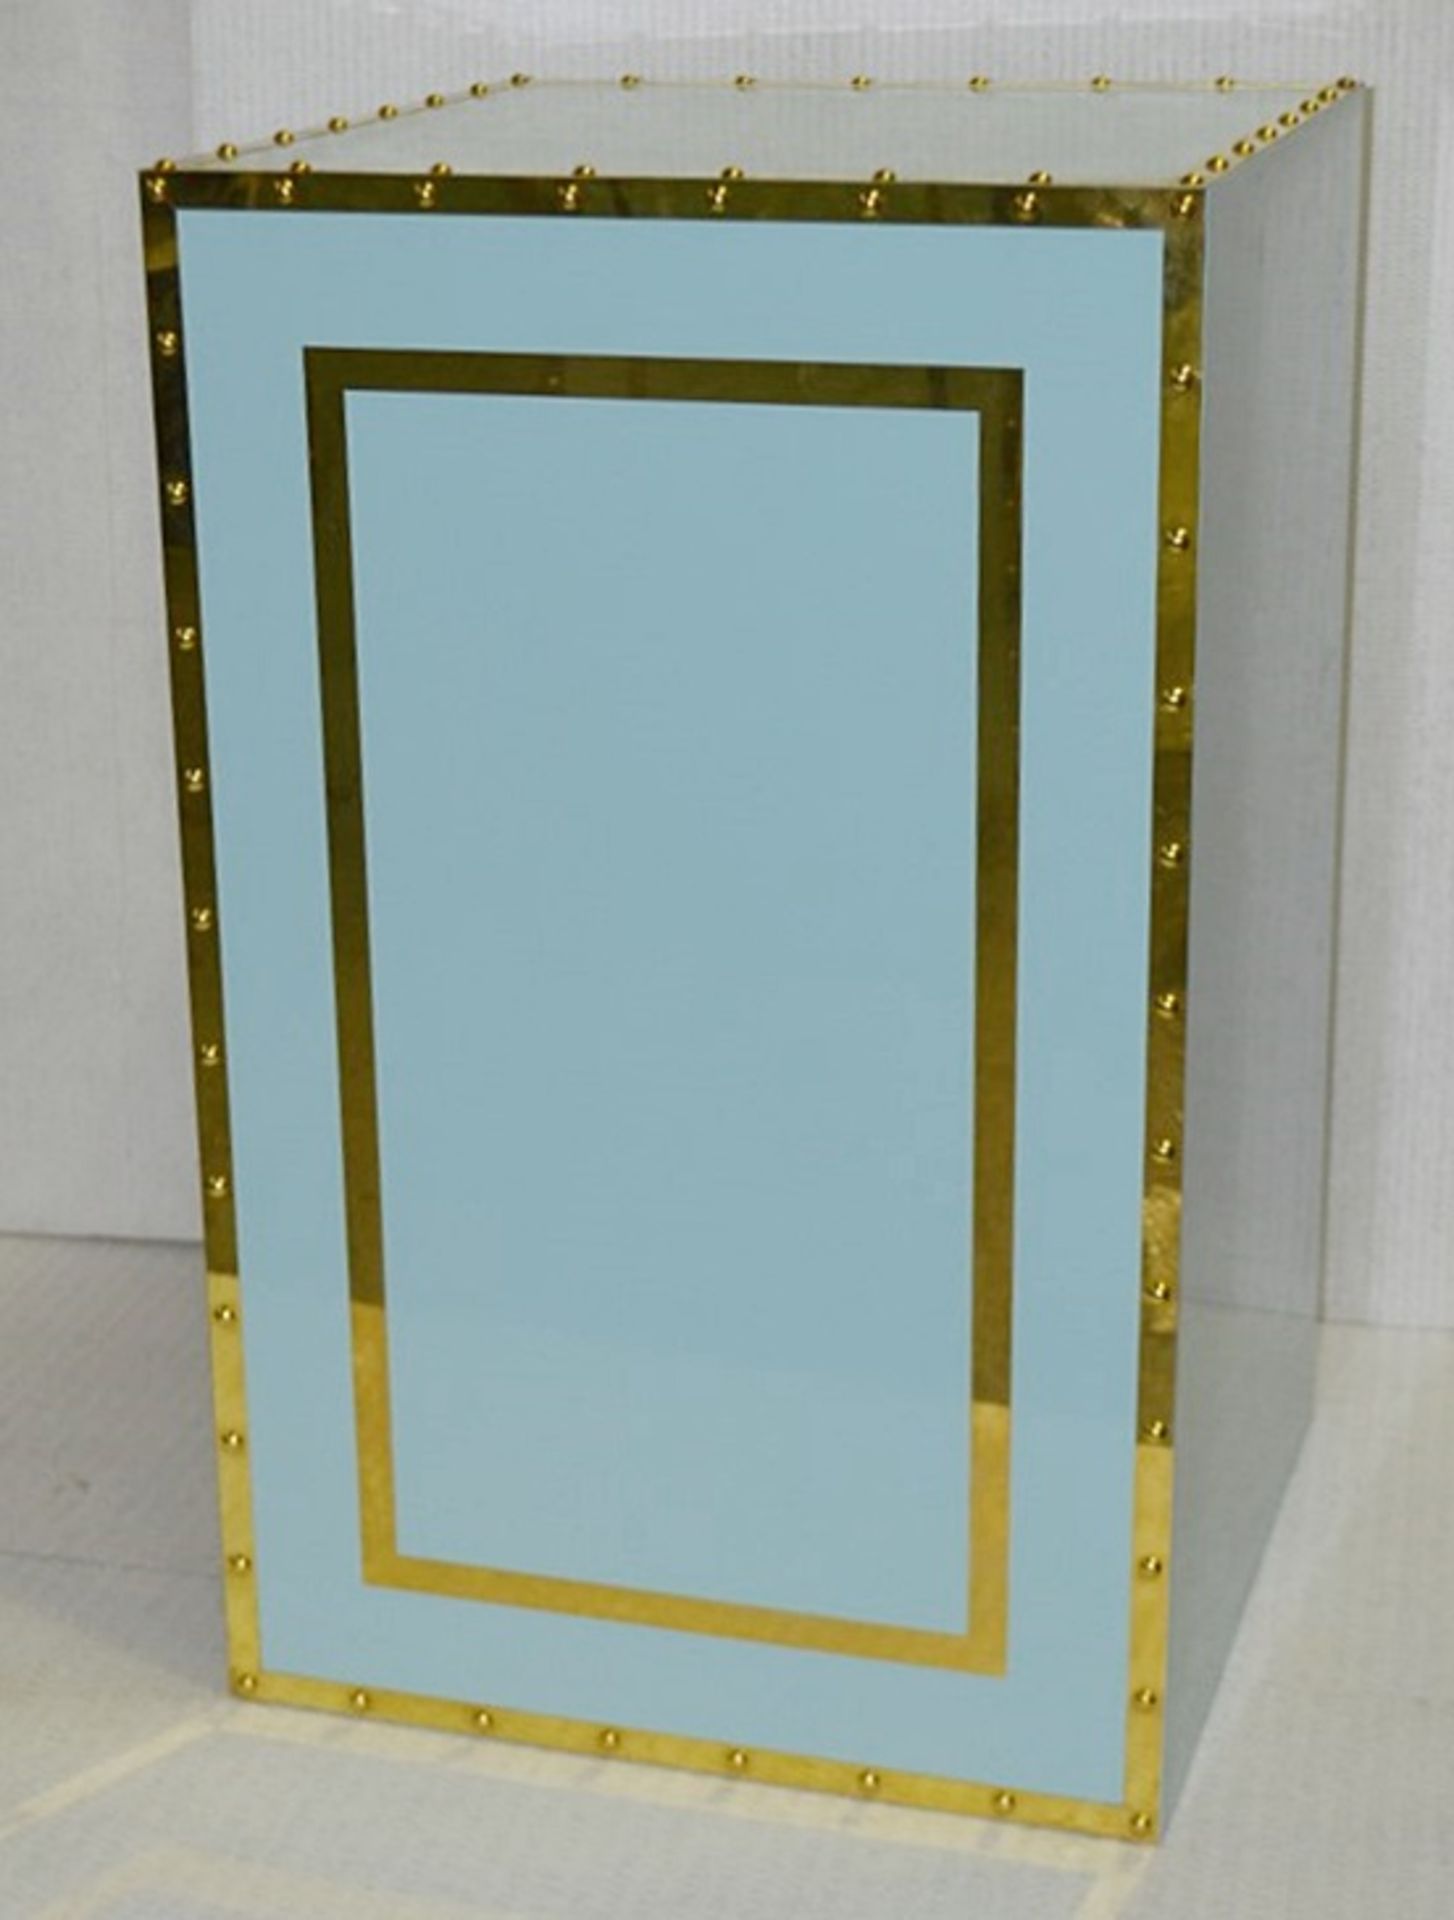 1 x Opulent Bank Vault Safe-style Shop Display Plinth In Tiffany Blue With Gold Trim - Image 4 of 6